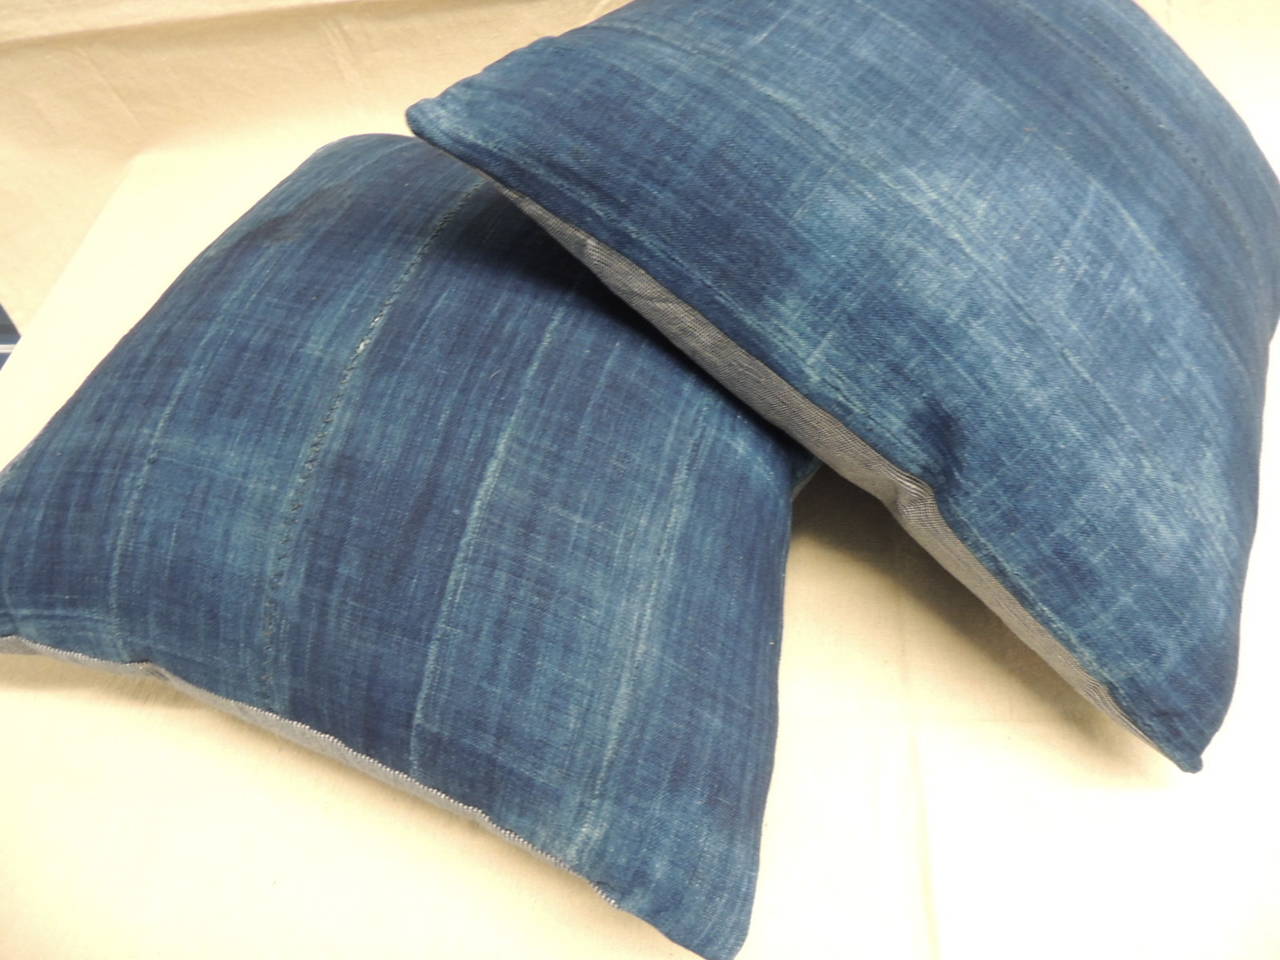 Pair of African indigo mud-cloth pillows with strie linen backing. (the mud-cloth are individually sewn strips of textile.)